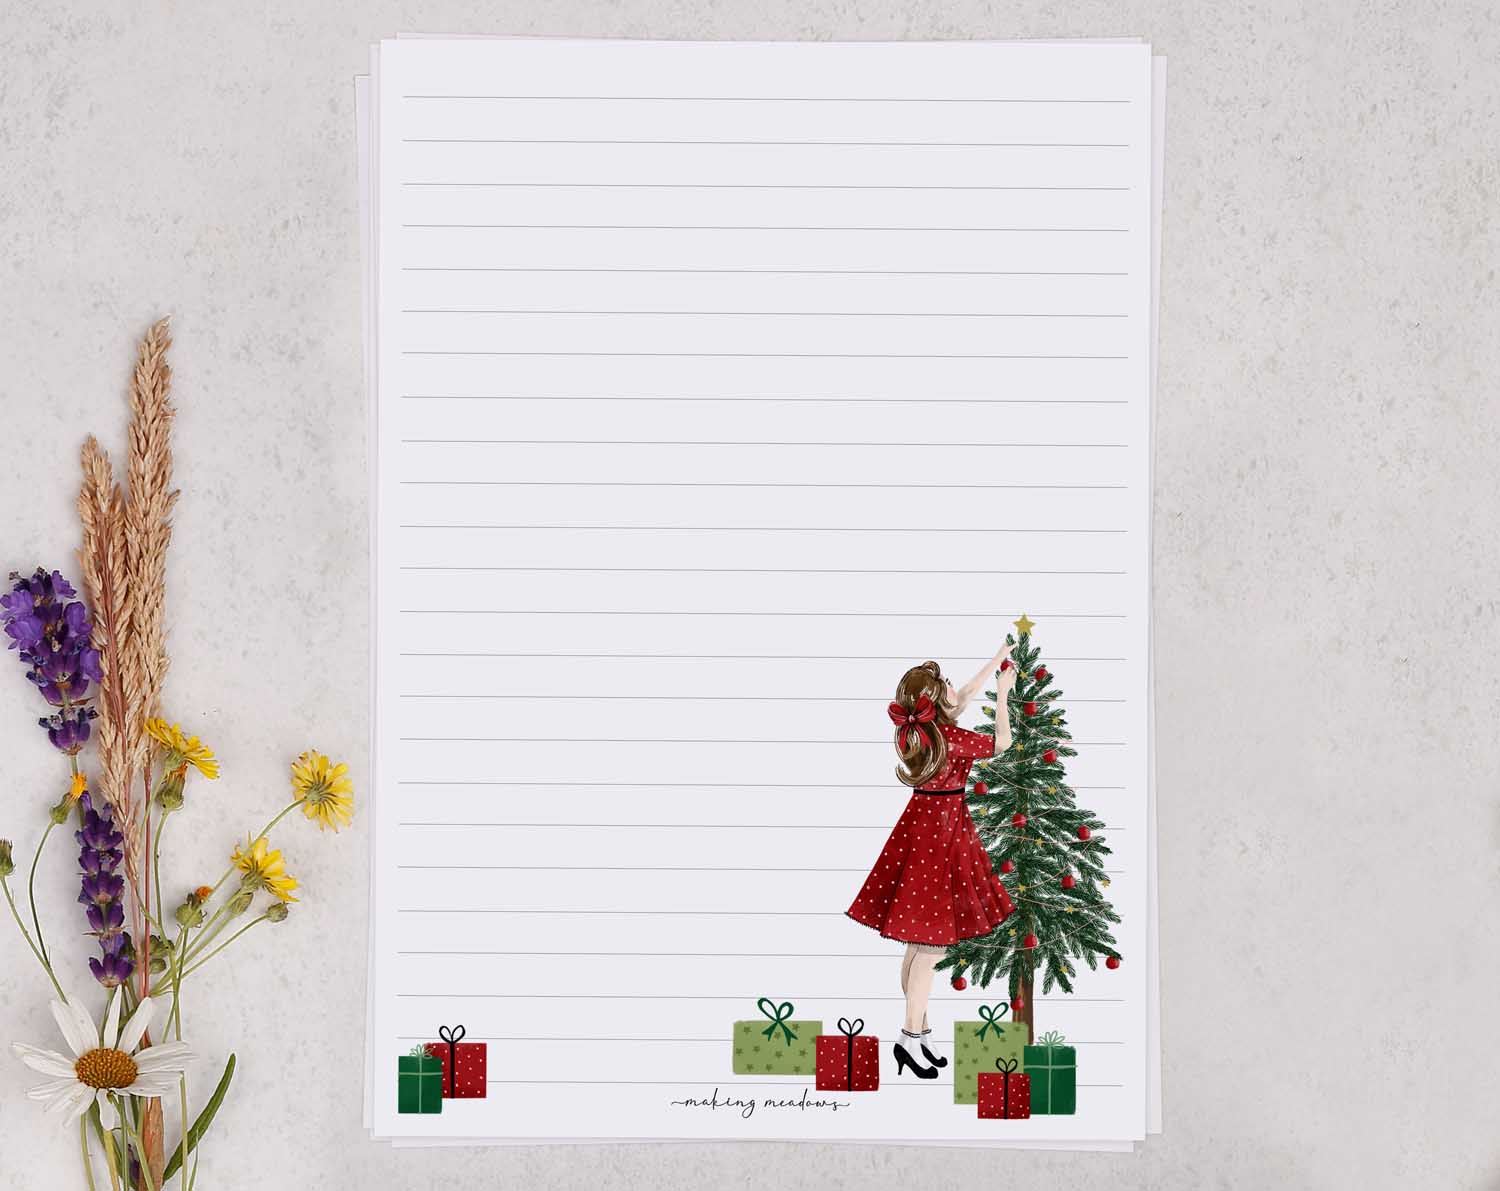 vintage girl with Christmas tree A5 writing paper set comes with matching envelopes